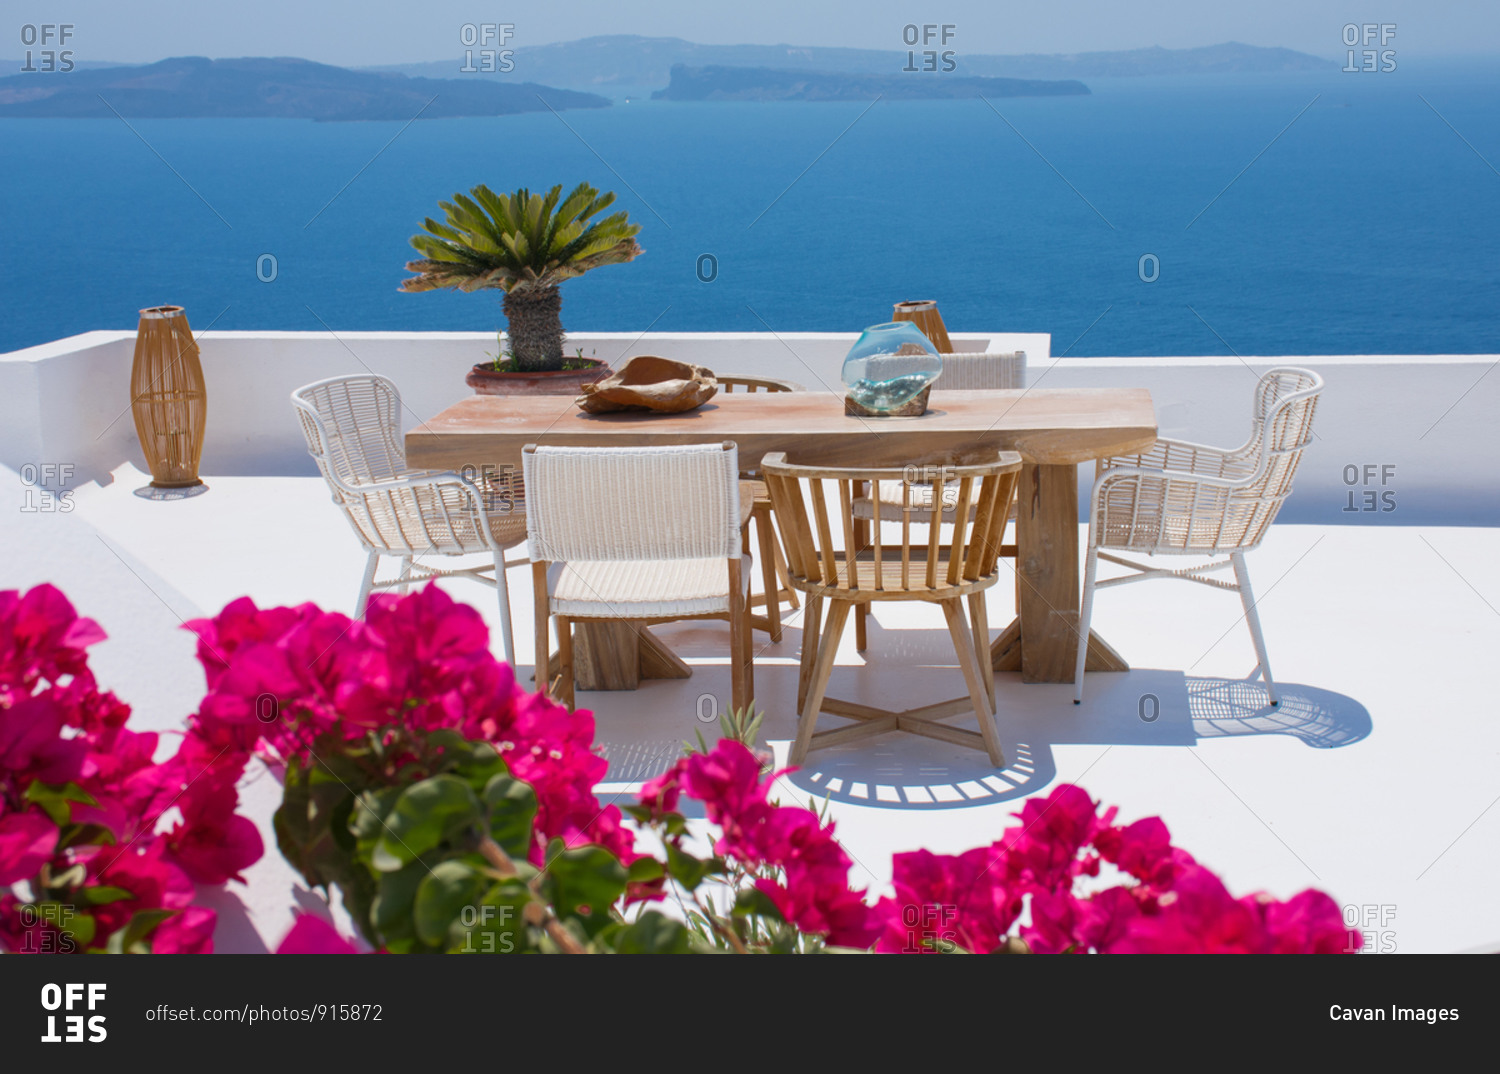 furniture composed by a table and some chairs on a white floral terrace of a house in Santorini Greece where you can enjoy a meal while seeing a romantic seascape to the blue Aegean sea. Hori